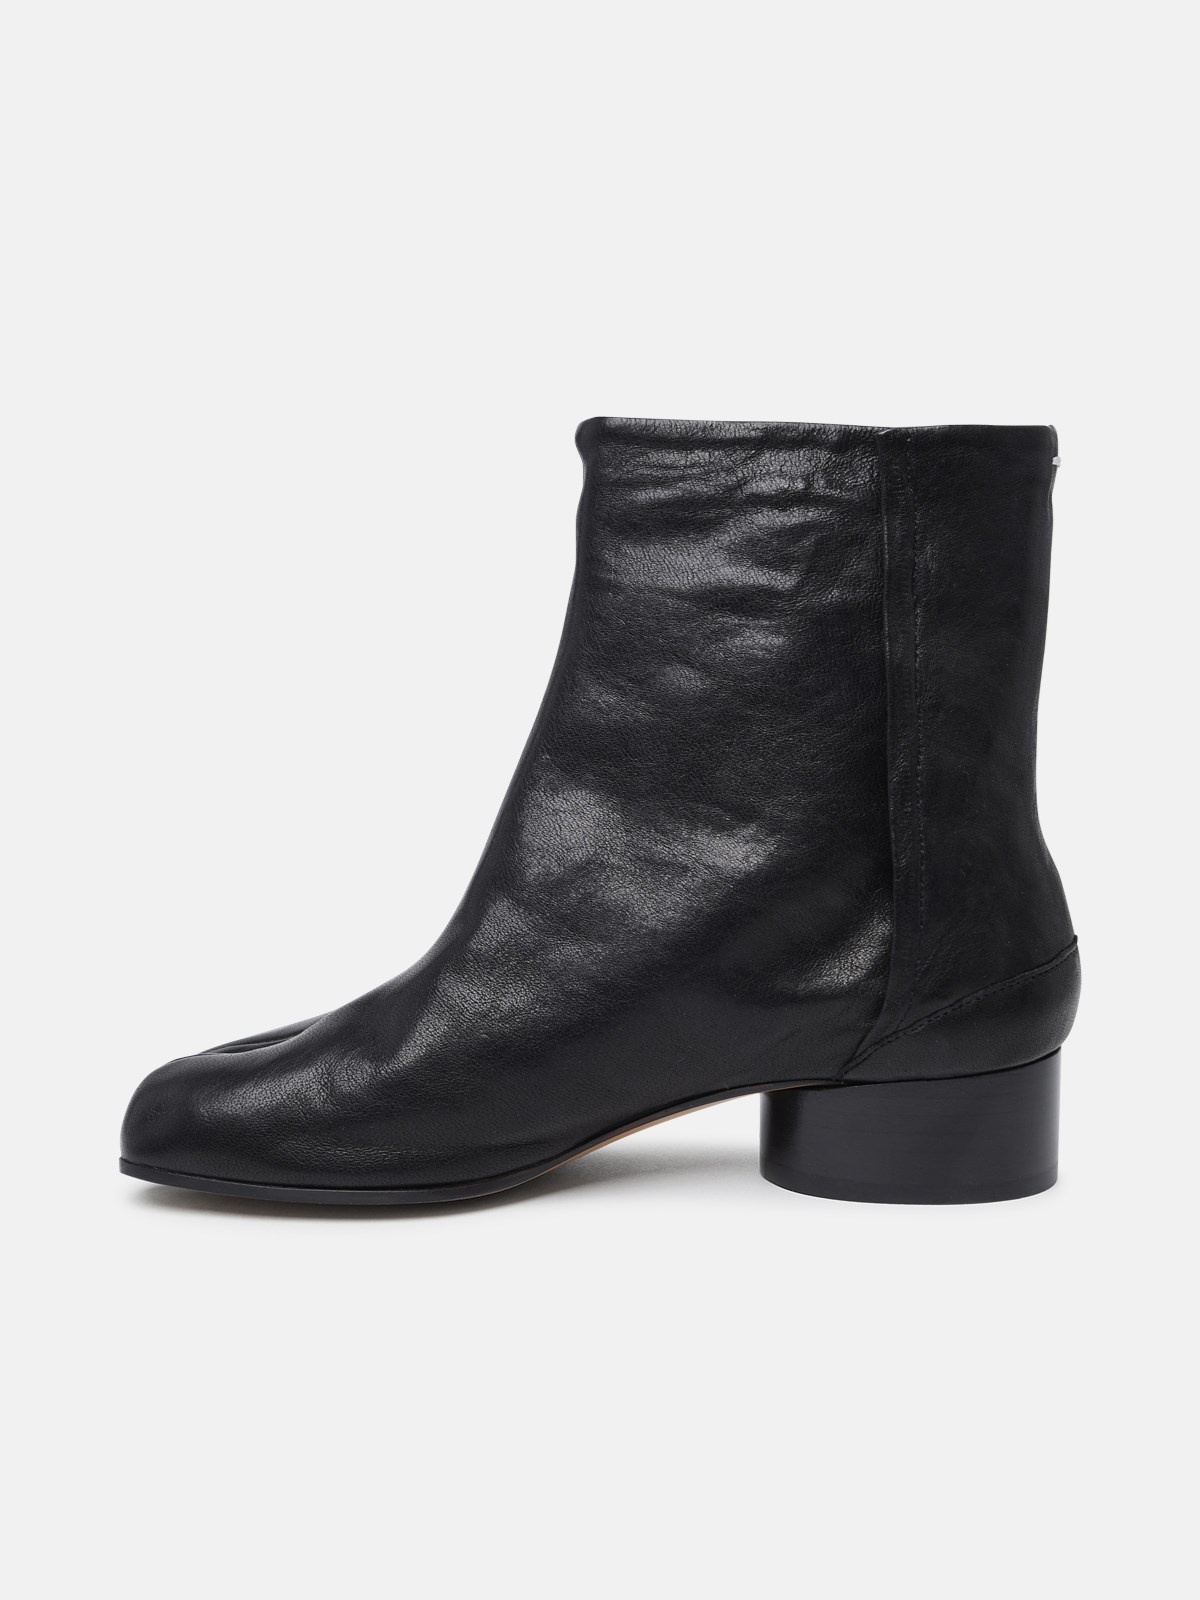 BLACK NAPPA LEATHER ANKLE BOOTS - 3